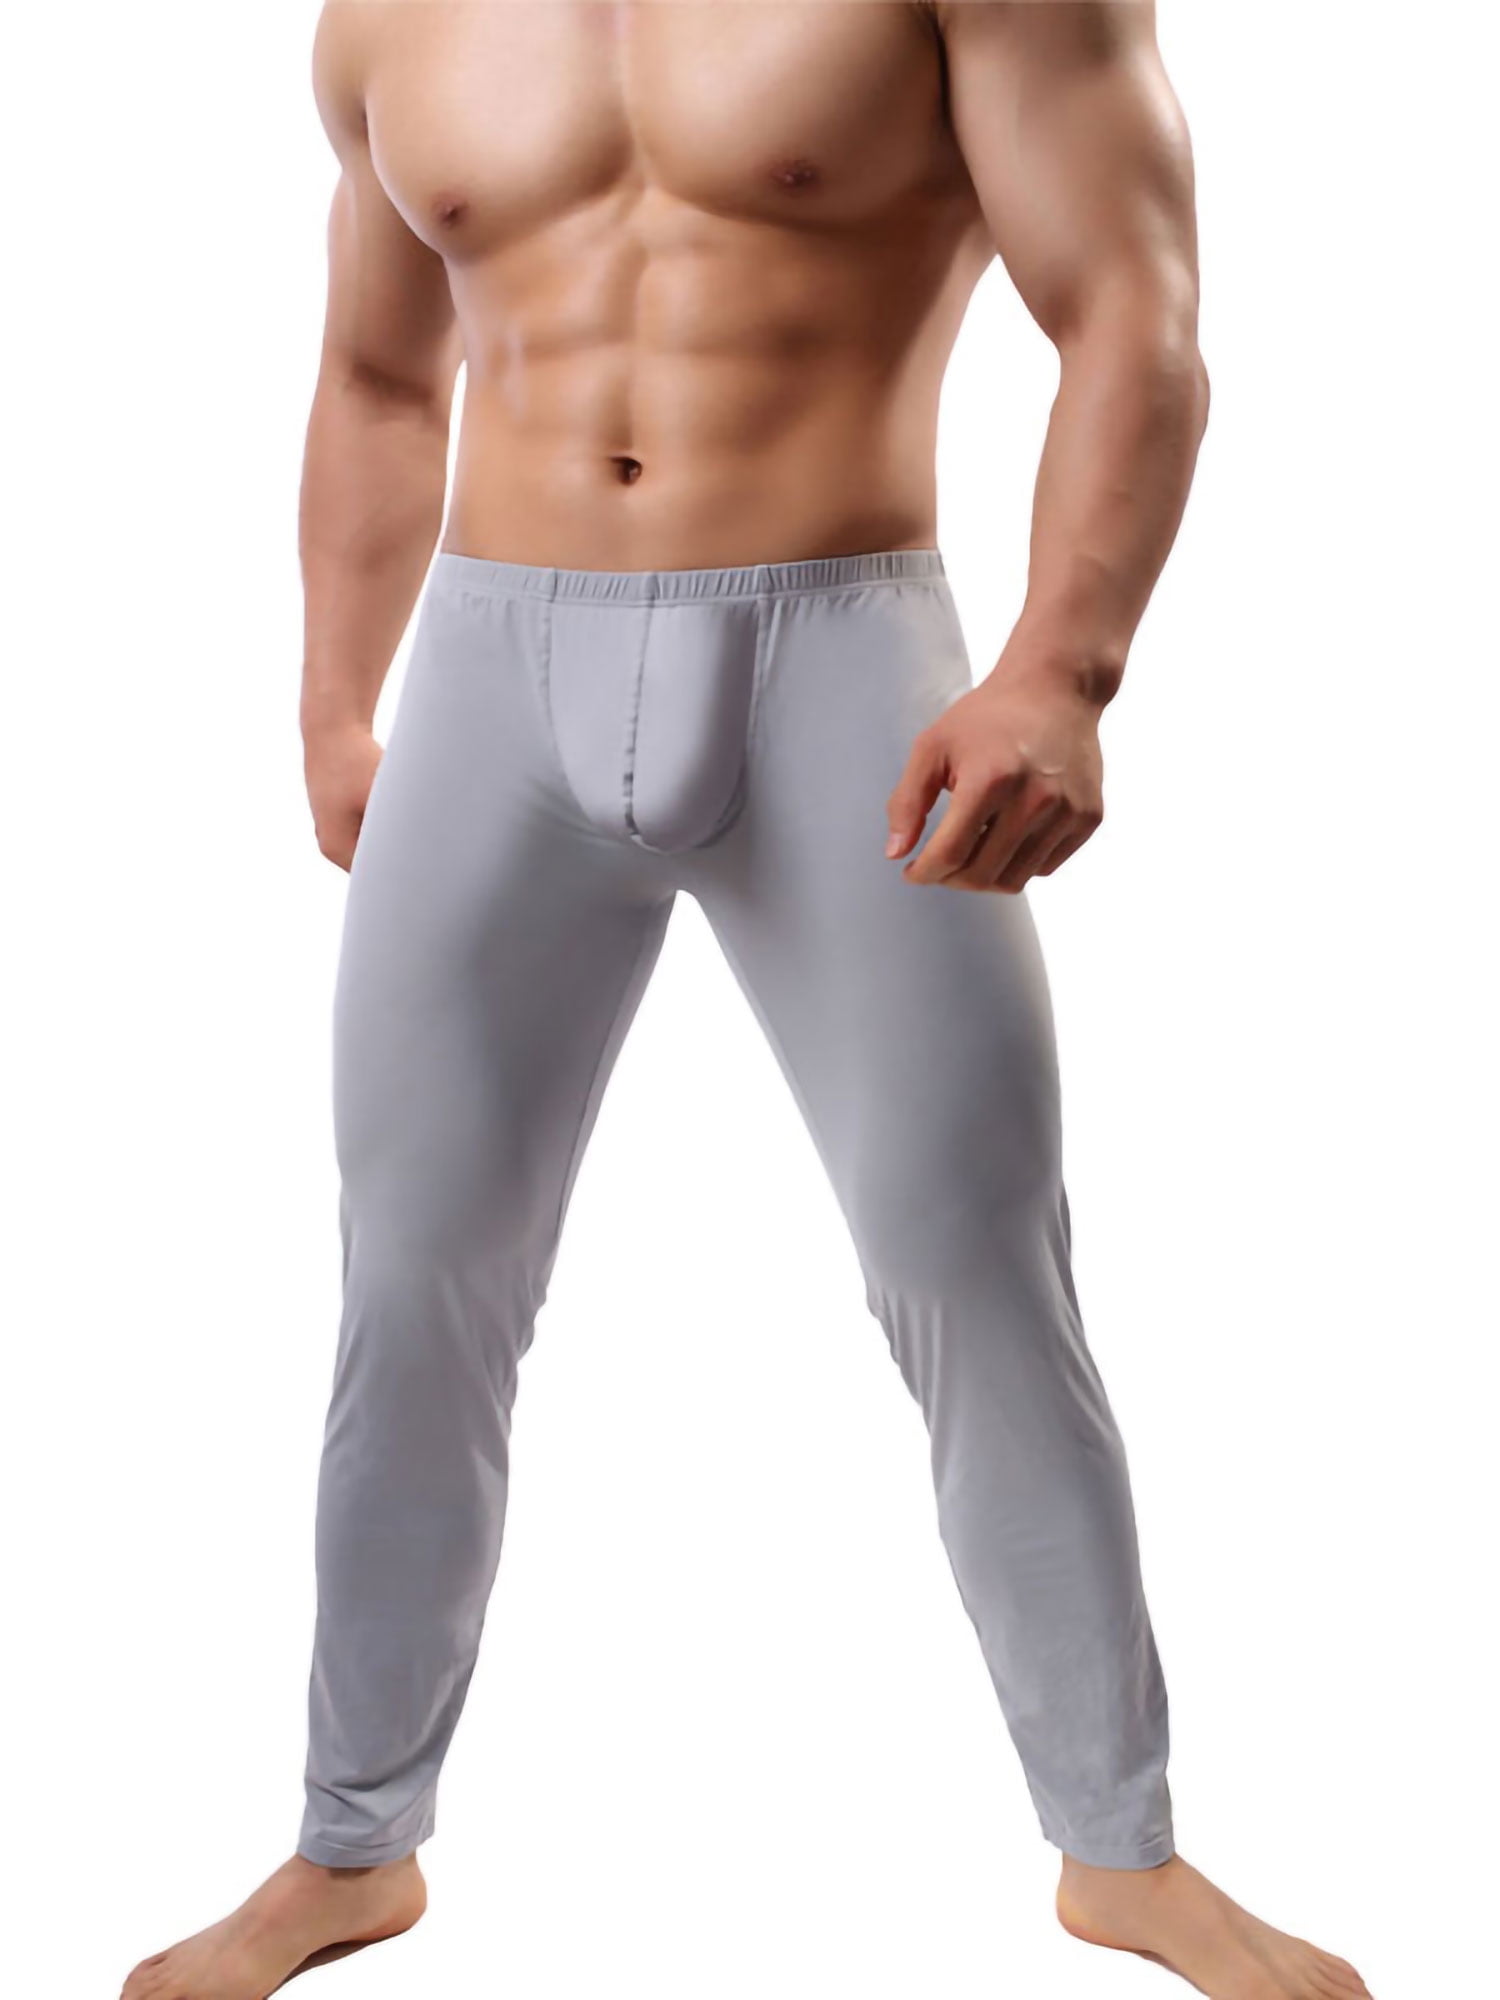 Mens Compression Shorts Fitness Pants Gym Base Layer Leggings Activewear Bottoms 